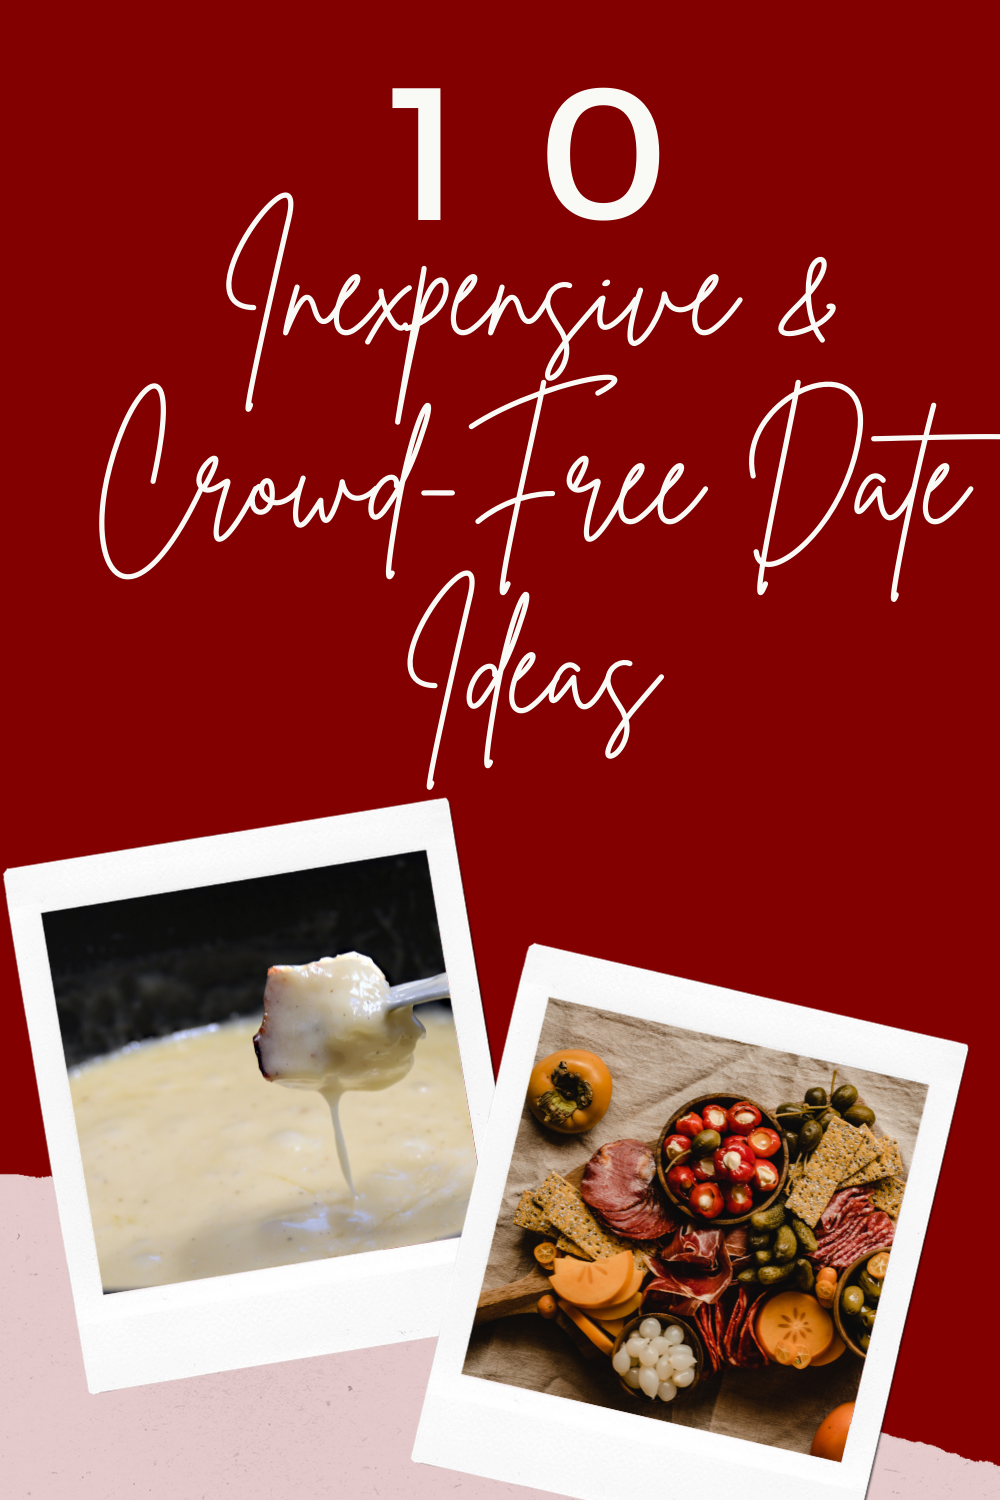 10 Inexpensive & Crowd-Free Valentines Date Ideas